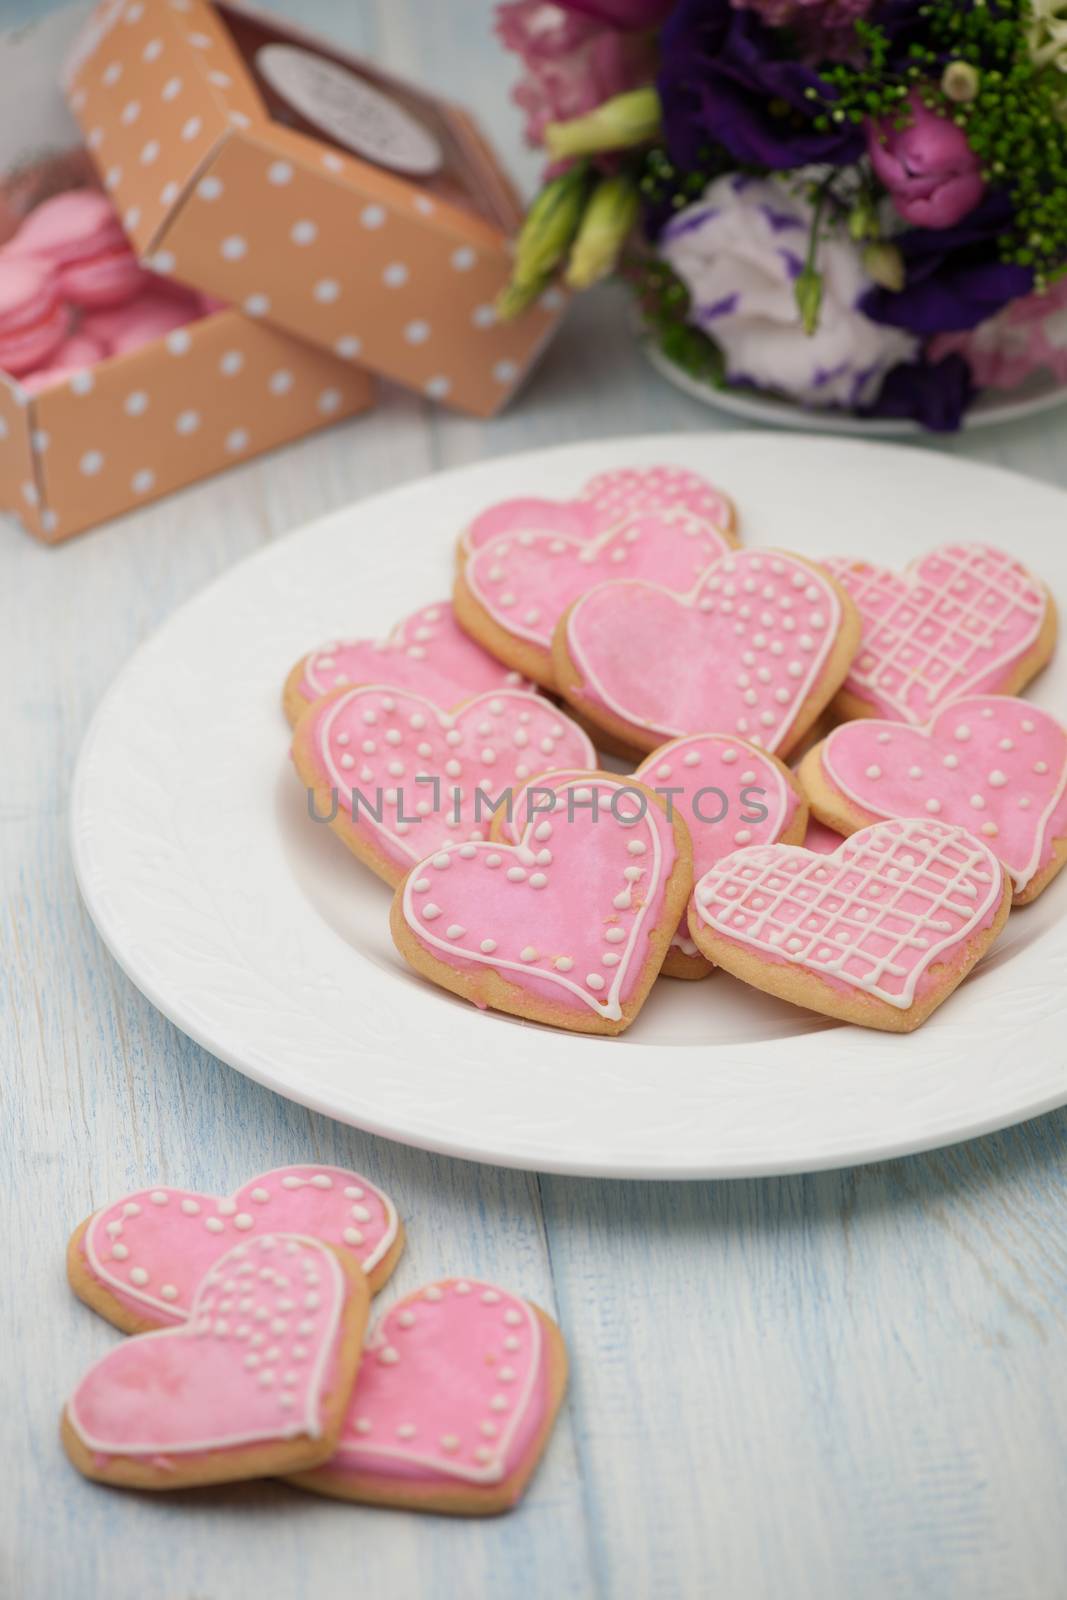 pink cookies in the shape of hearts on a plate and gift box and flowers on Valentine's Day